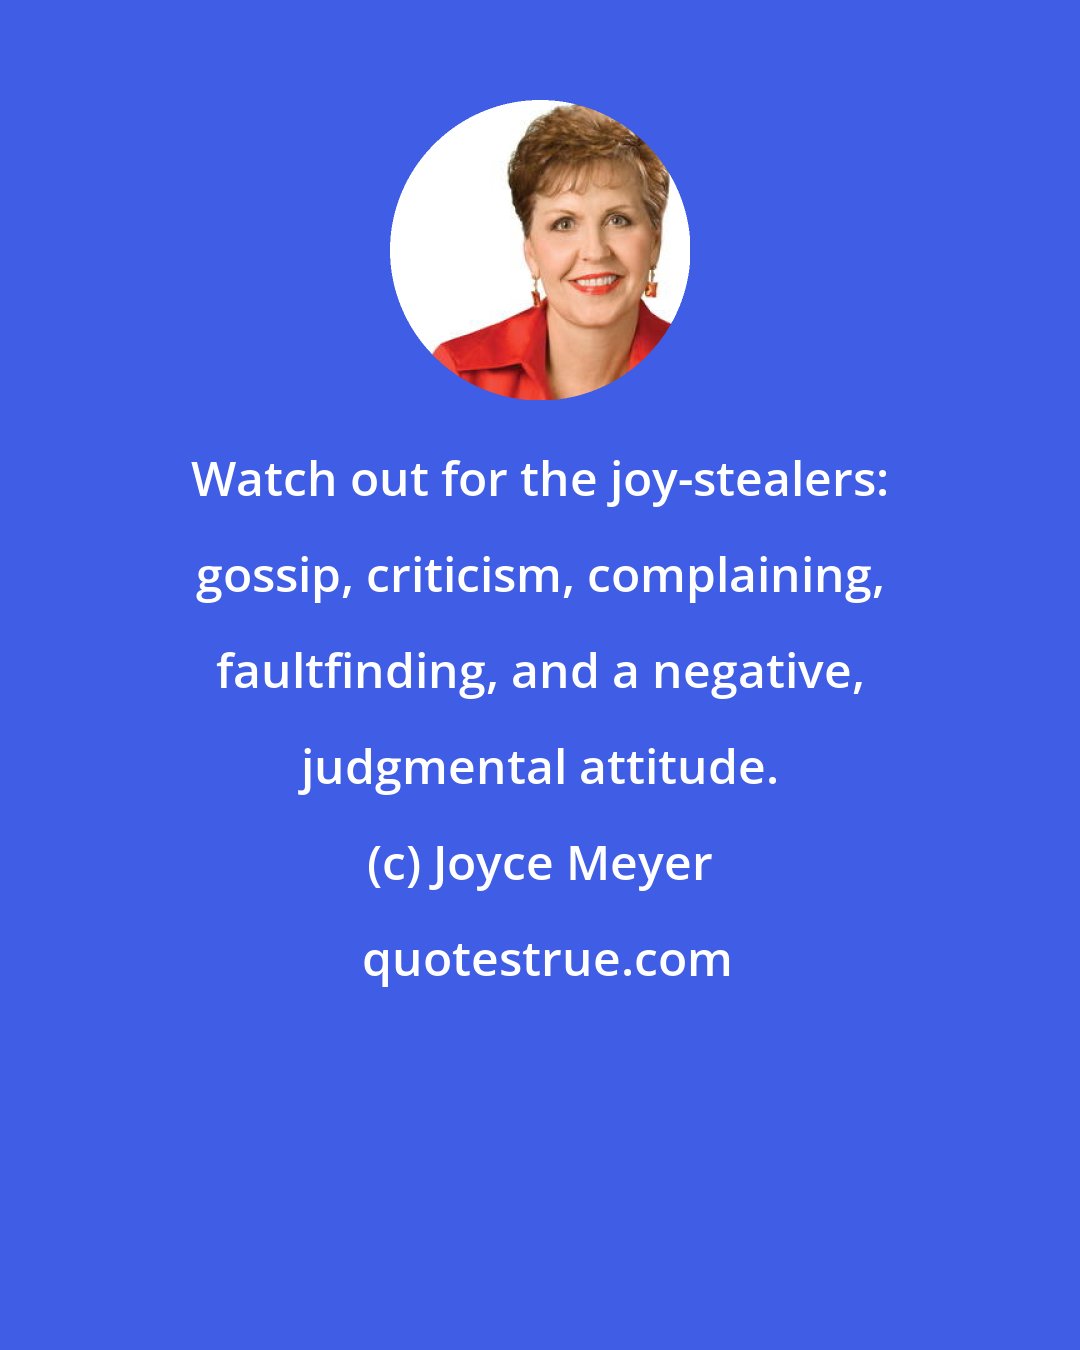 Joyce Meyer: Watch out for the joy-stealers: gossip, criticism, complaining, faultfinding, and a negative, judgmental attitude.